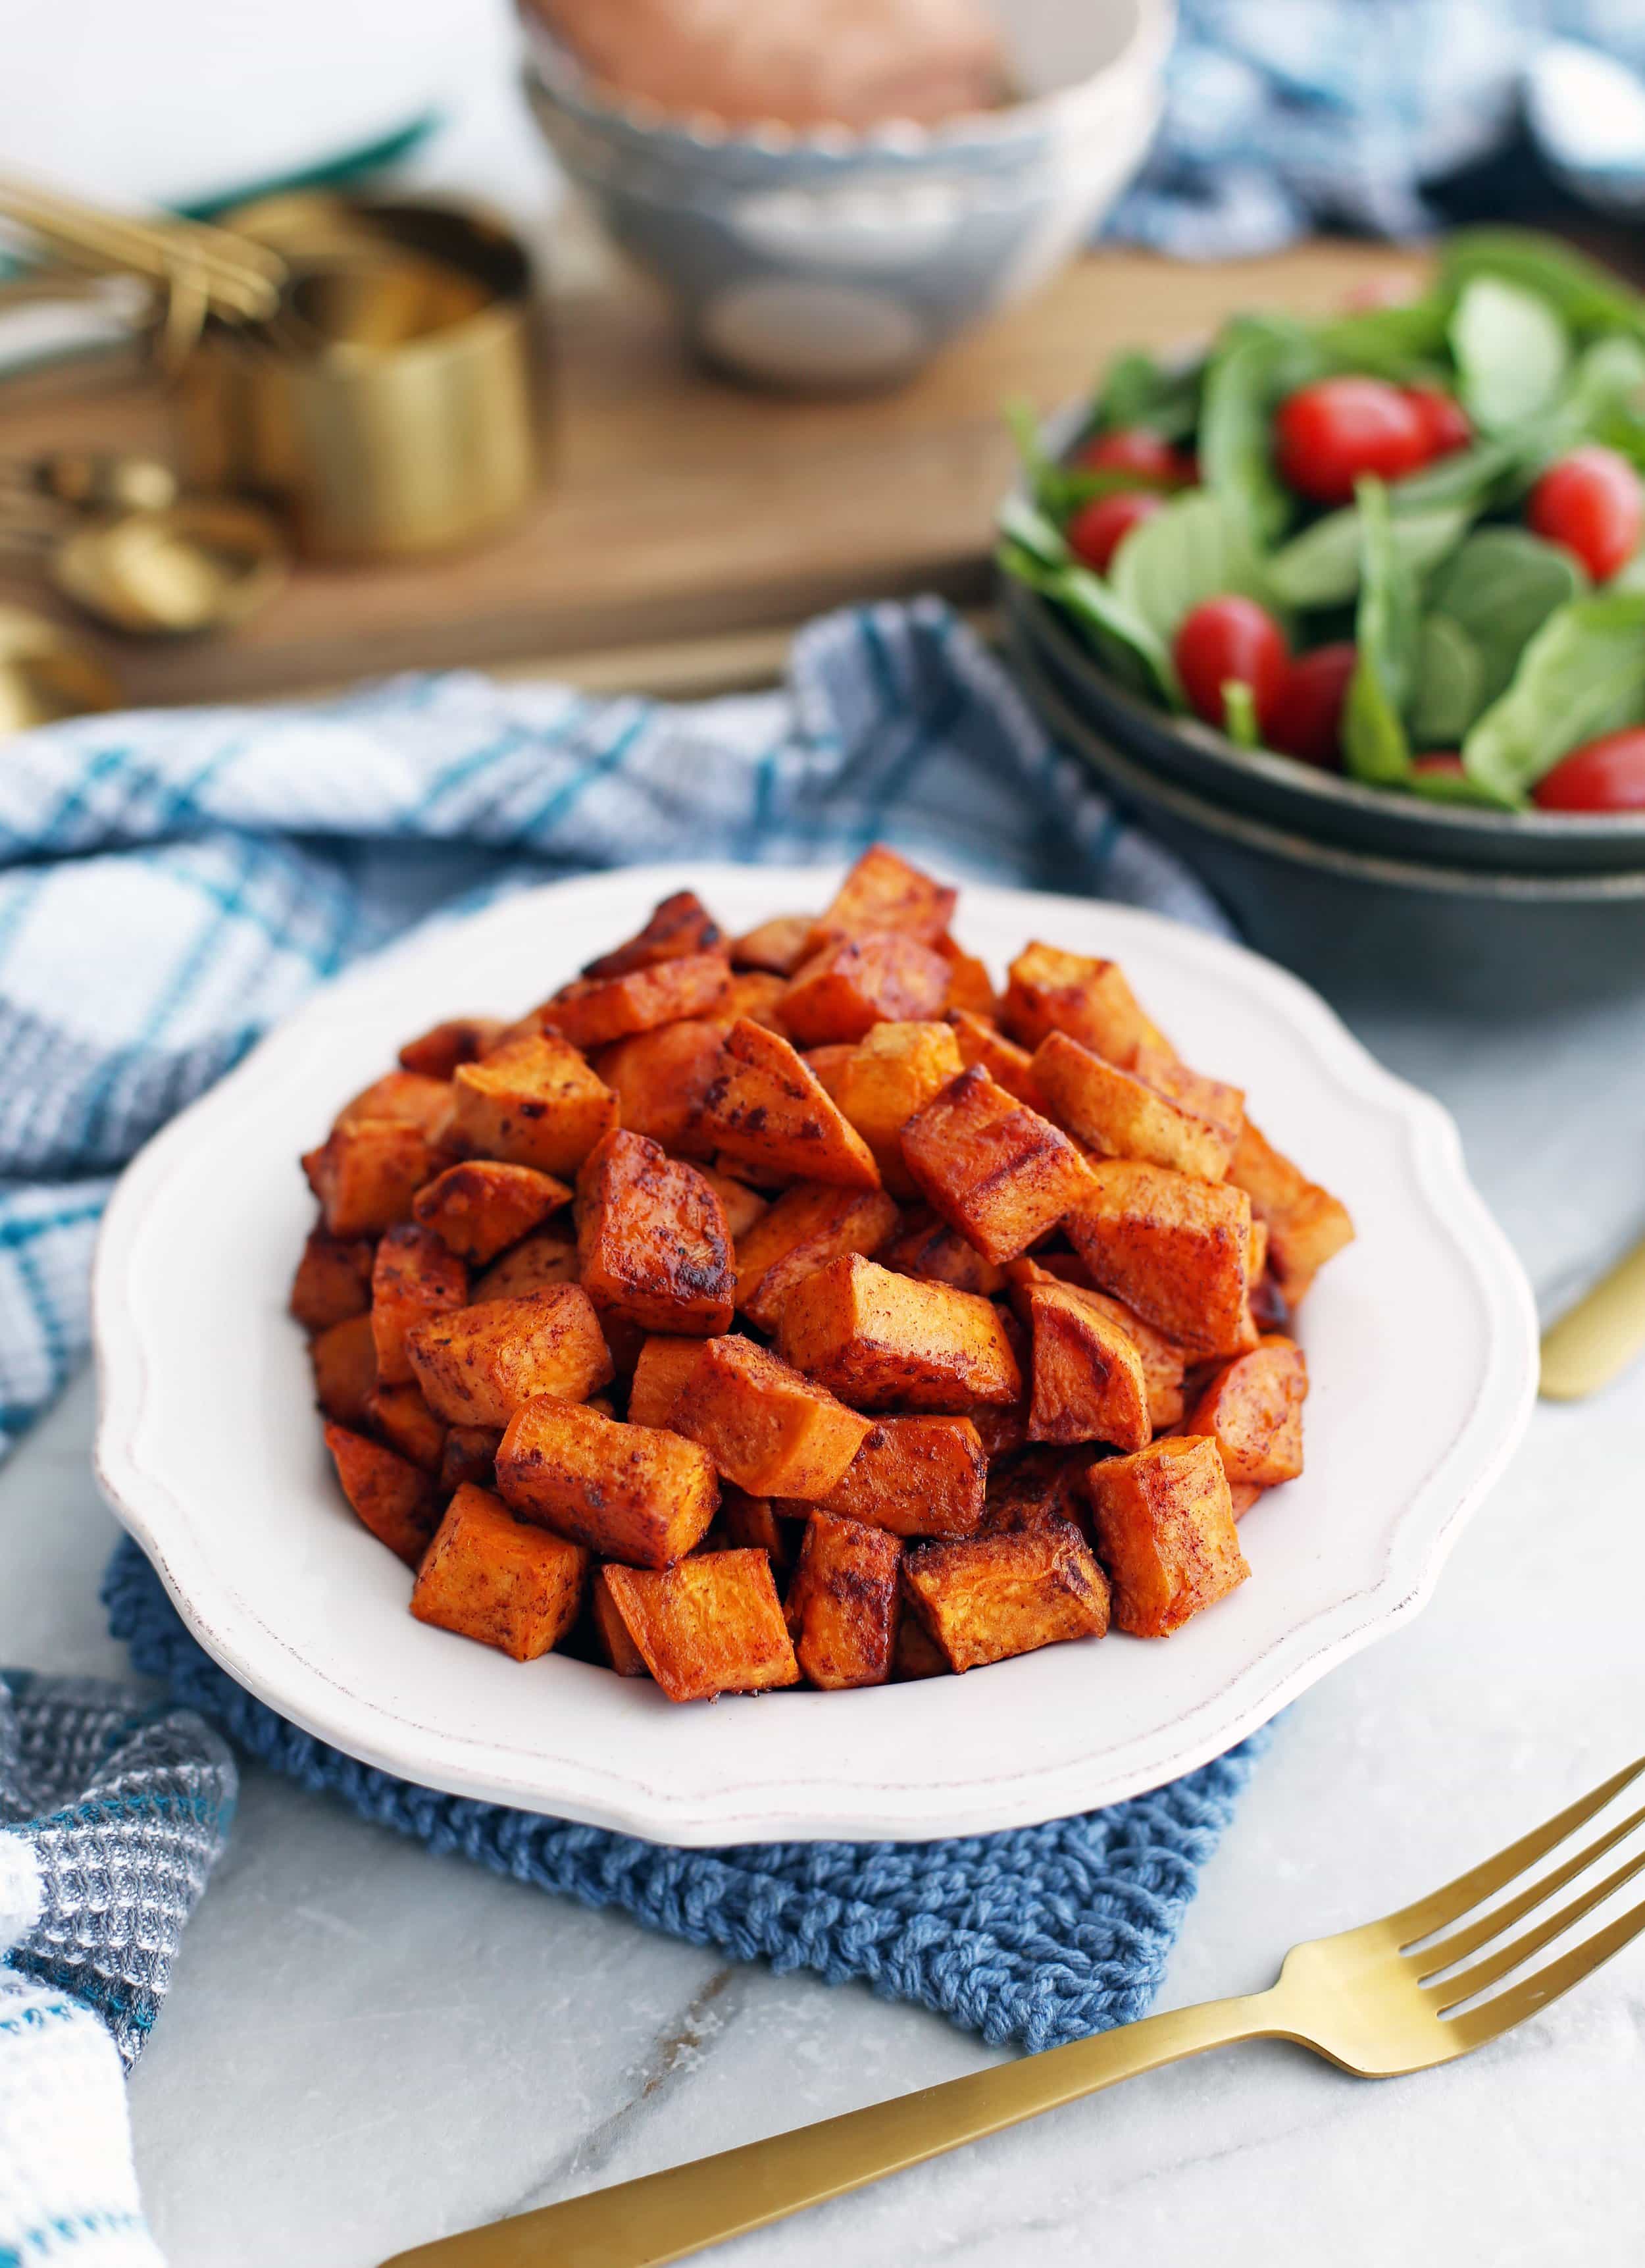 Bite-sized roasted maple cinnamon sweet potatoes piled in a white bowl with a fork to its side.